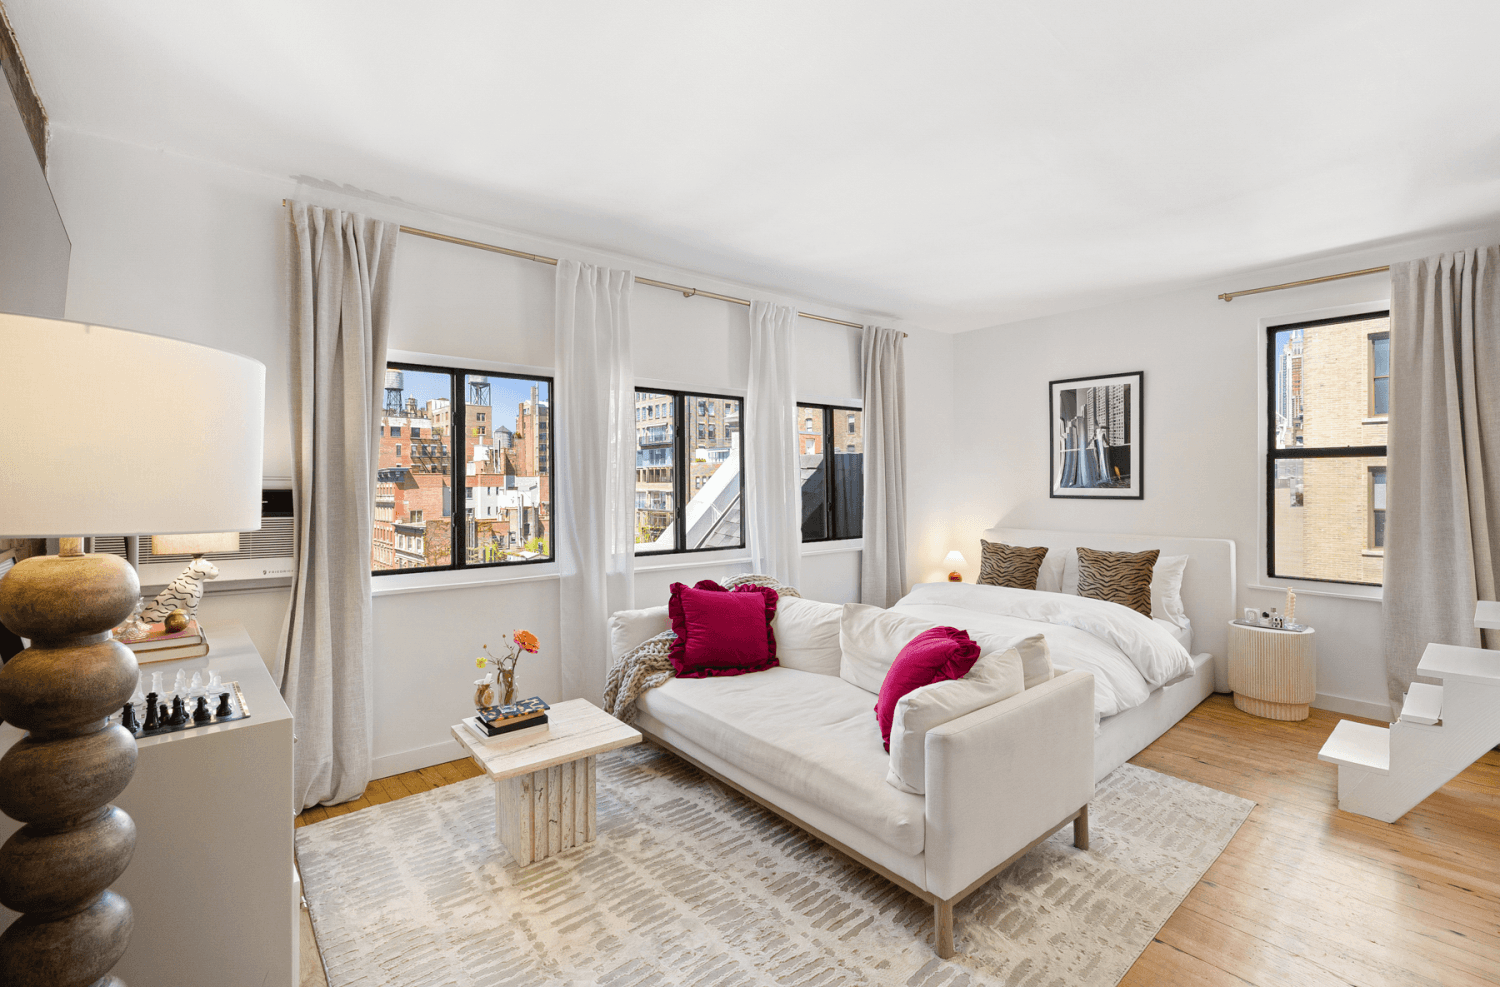 An enchanting top floor co op with a private rooftop terrace and exposed redbrick walls, this chic 1 bathroom studio loft offers a quintessential Greenwich Village lifestyle close to Union ...